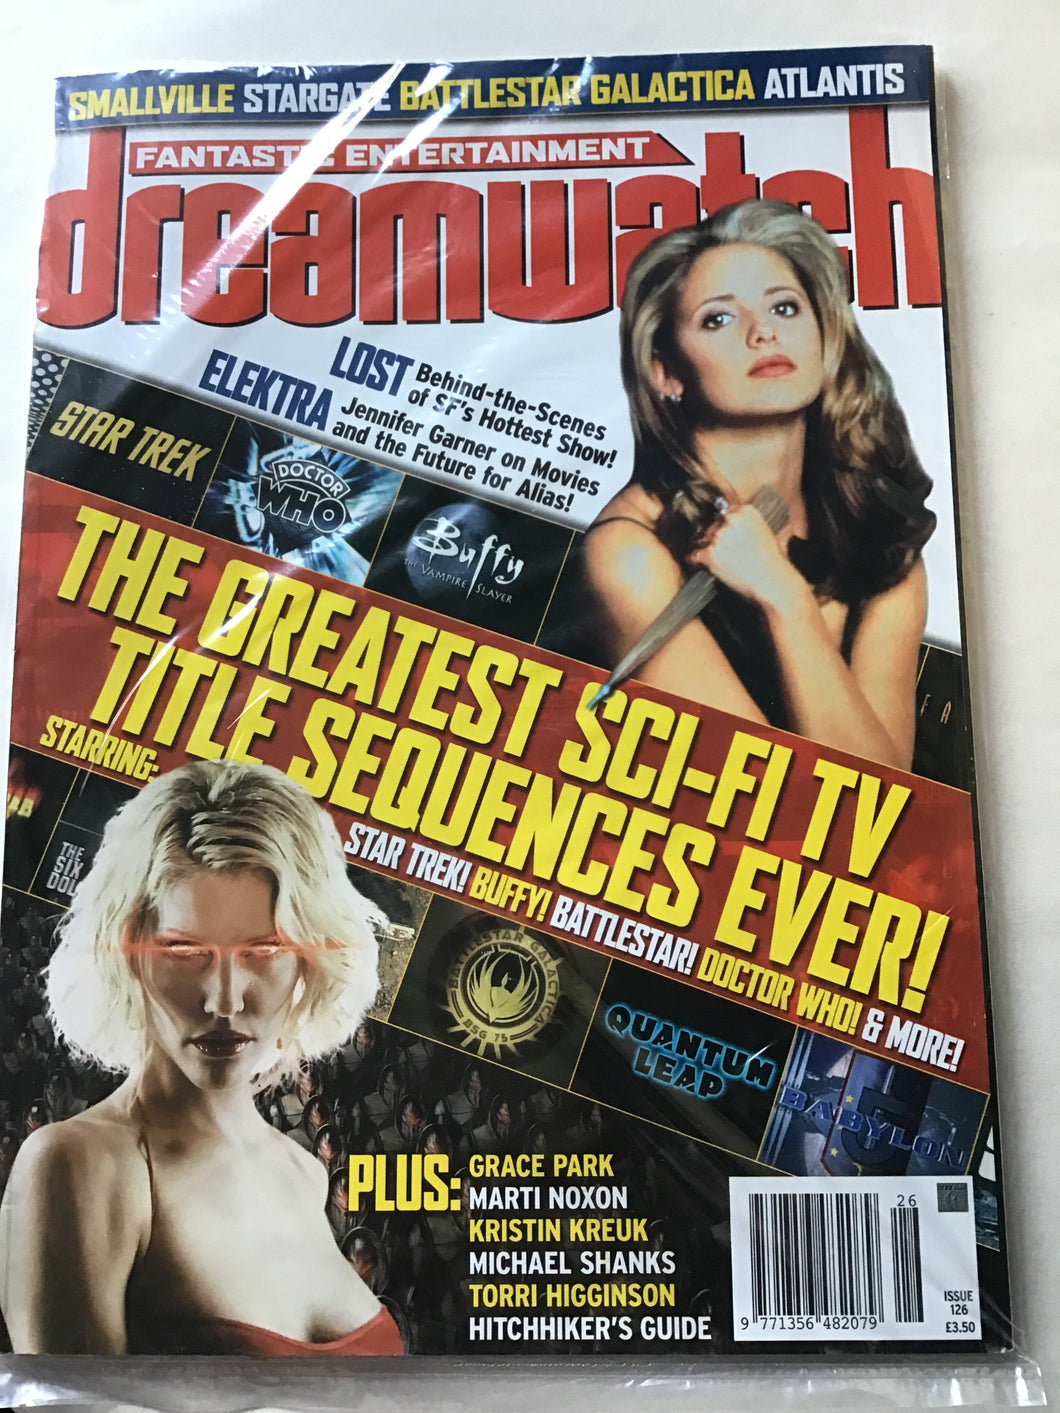 Dream watch magazine March 2005 issue 126 Star Trek Doctor Who Buffy Electra lost quantum leap Babylon 5